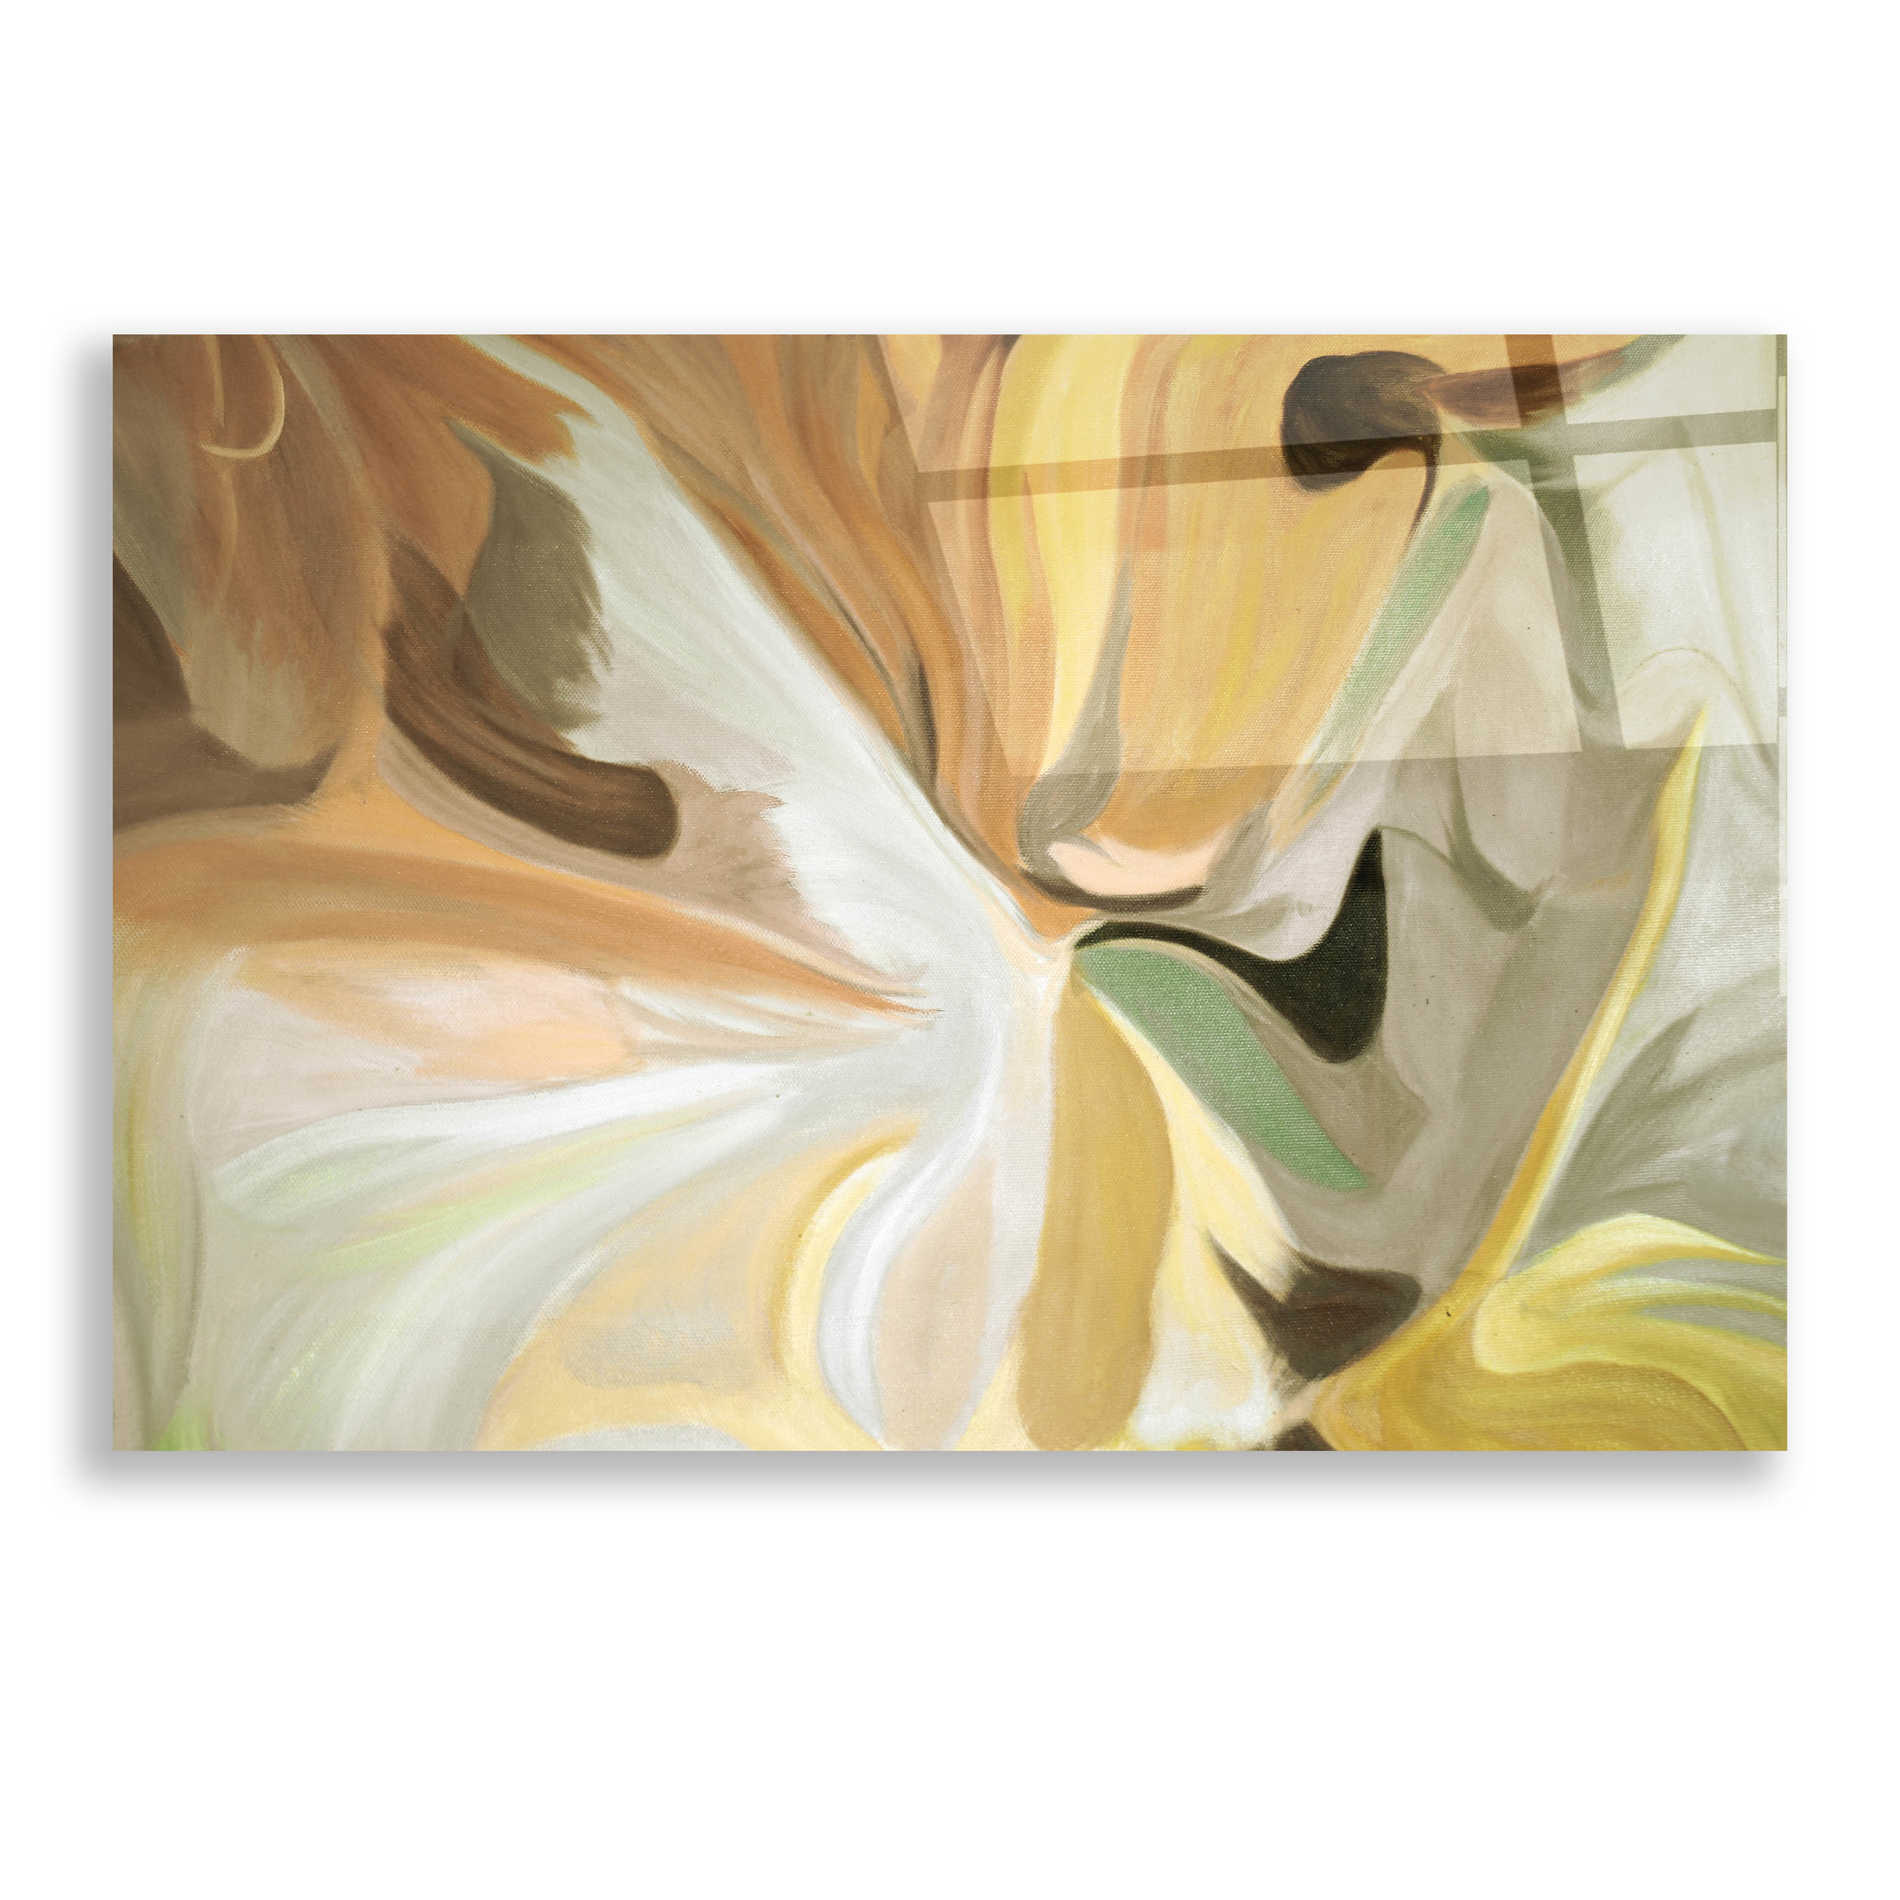 Epic Art 'Notes of Elegance 7' by Irena Orlov, Acrylic Glass Wall Art,24x16